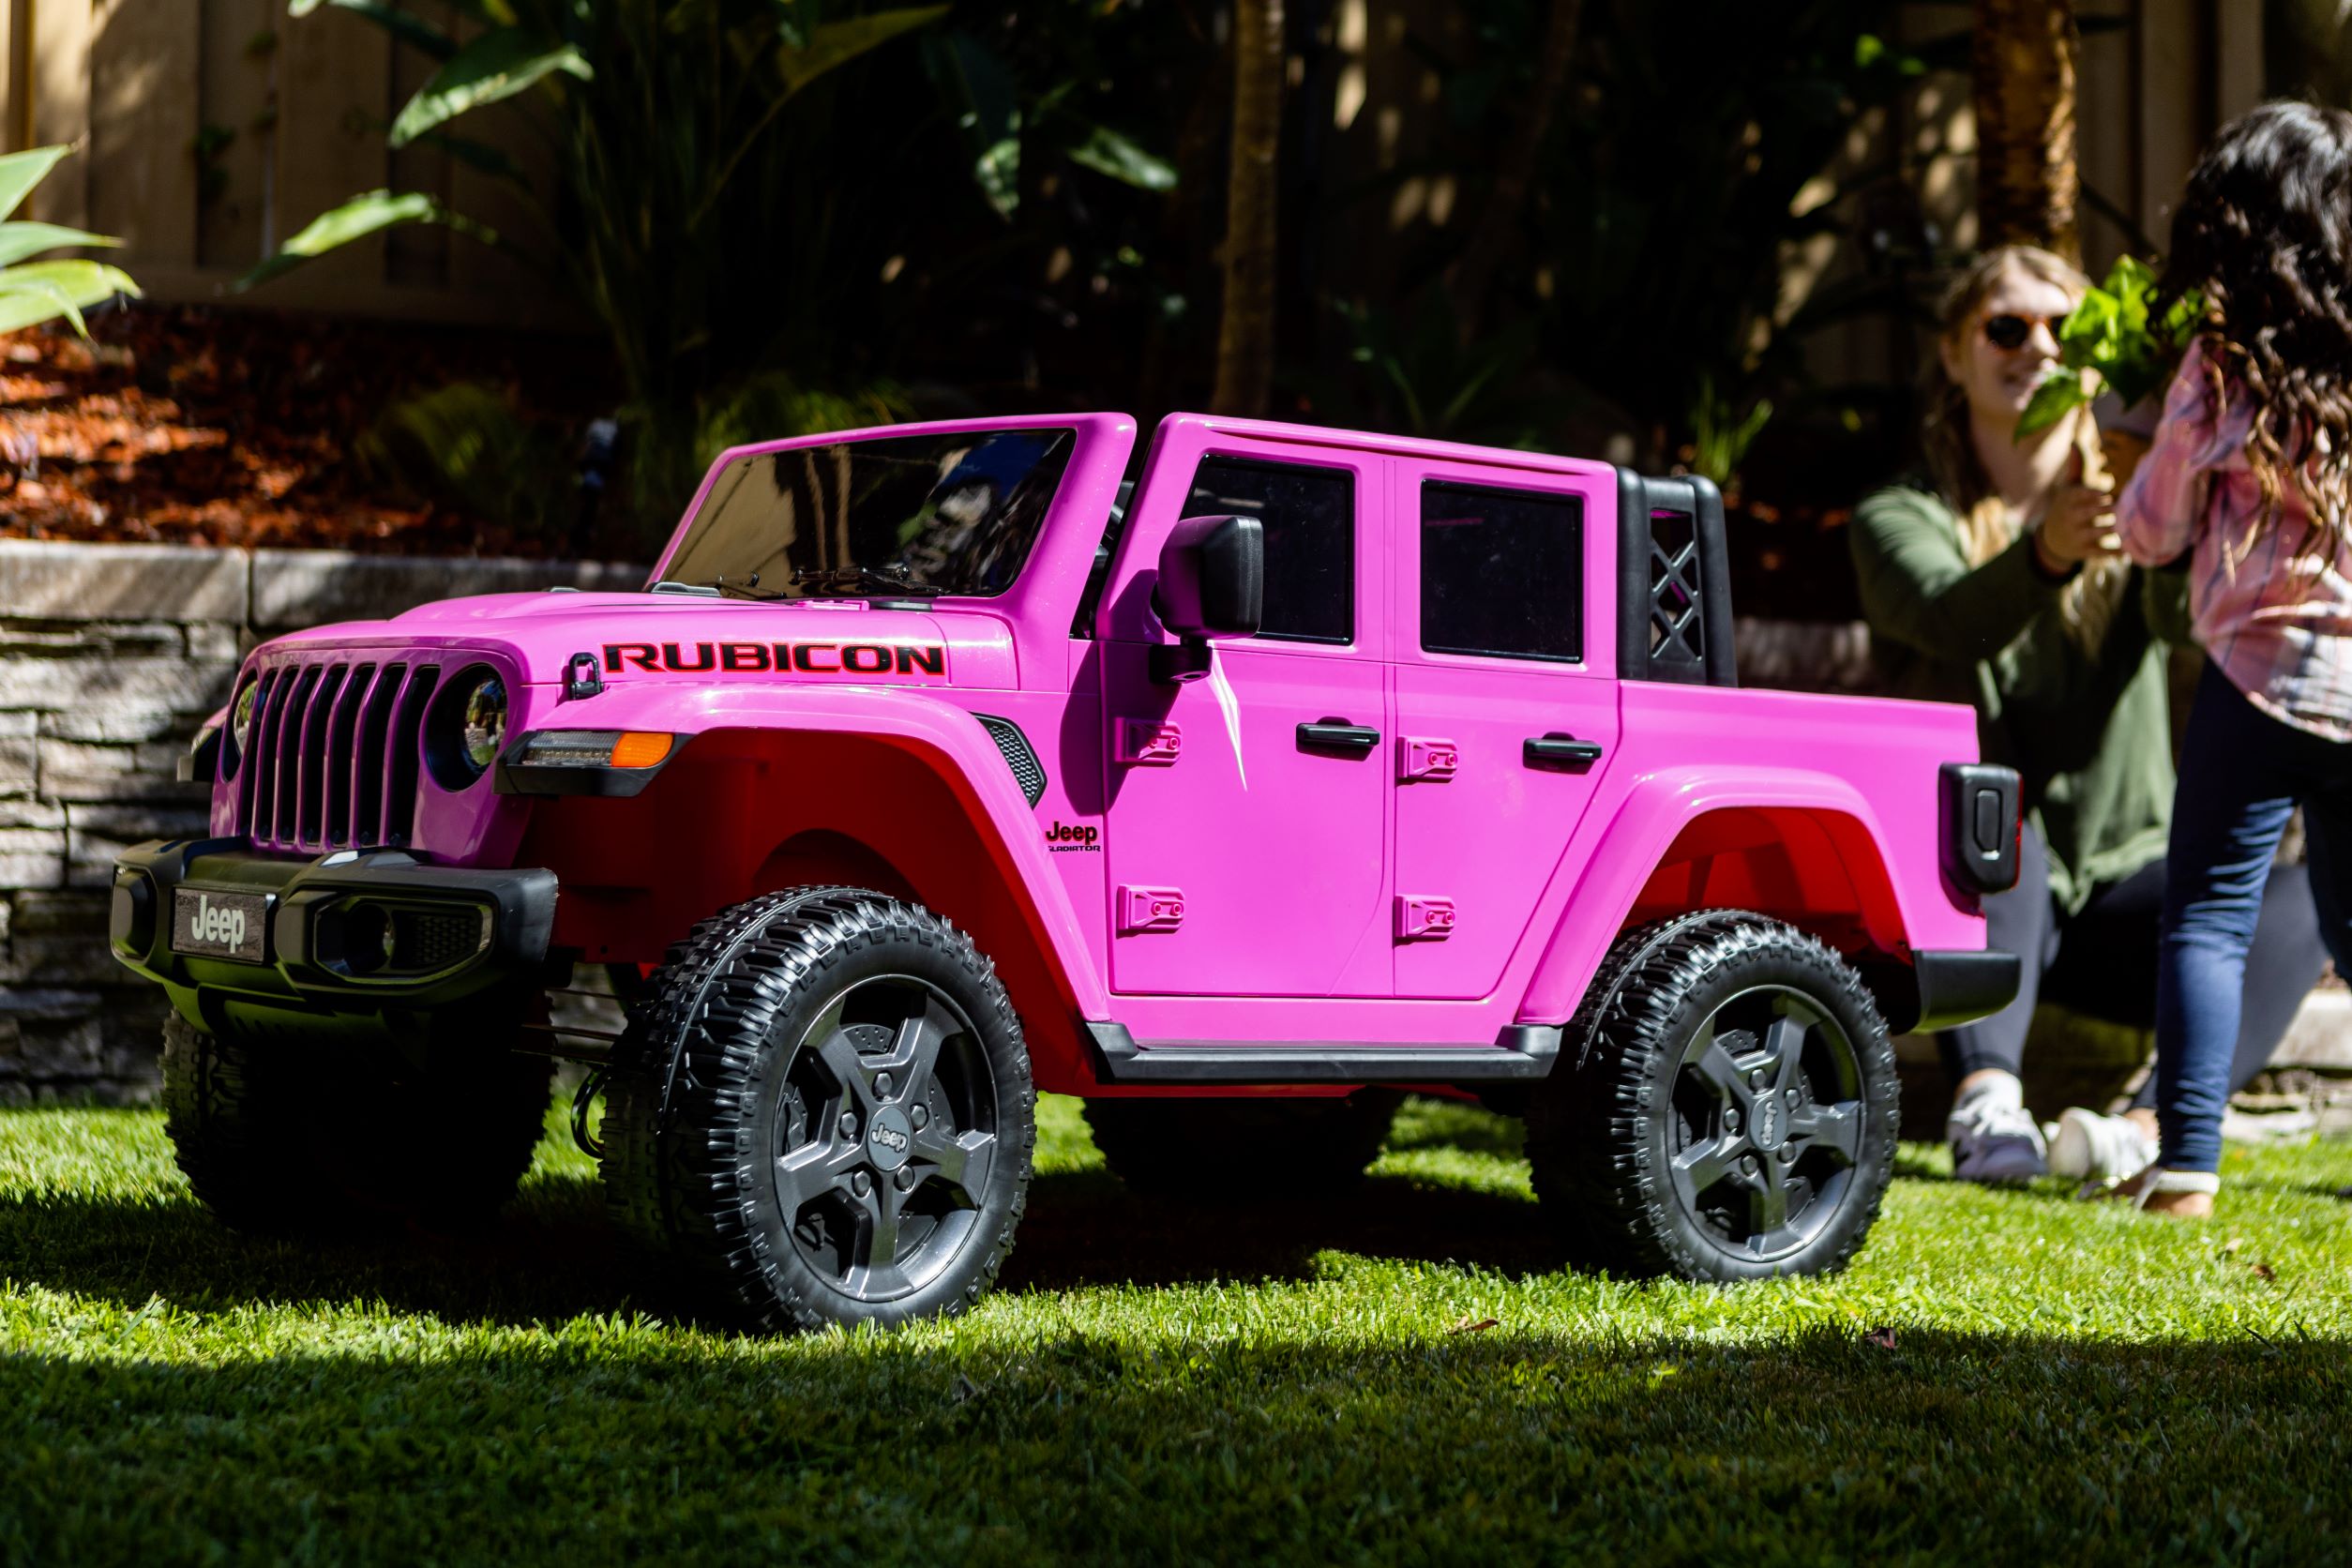 12V Jeep Gladiator Rubicon Battery Powered Ride-on by Hyper Toys, 2-Seater, Pink, for a Child Ages 3-8, Max Speed 5 mph - image 5 of 13